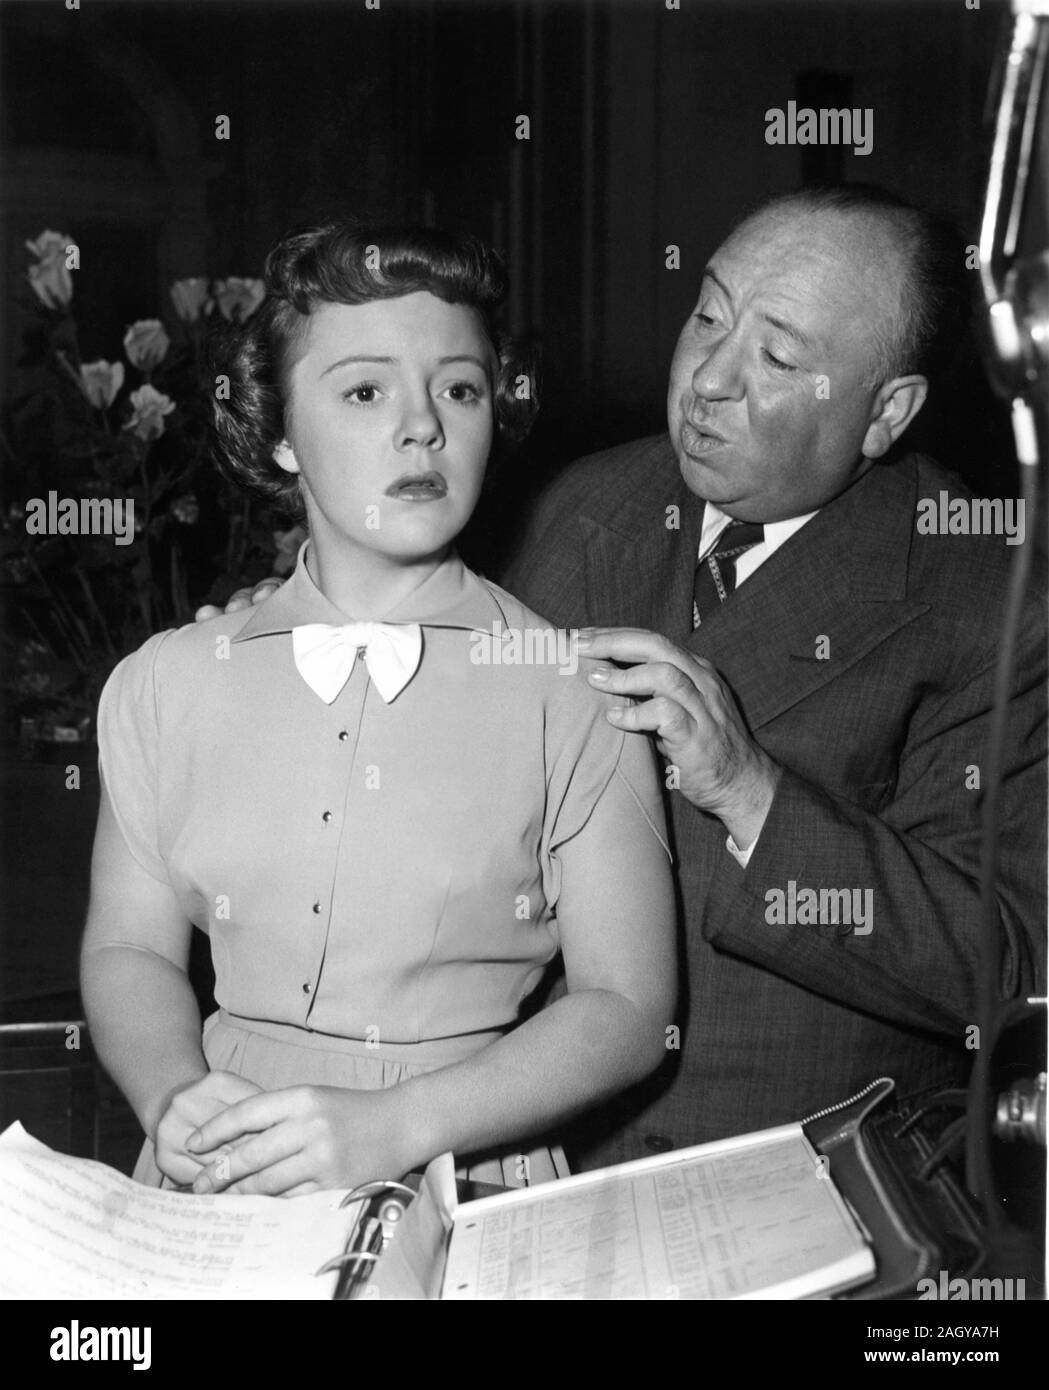 Director ALFRED HITCHCOCK with his actress daughter PAT / PATRICIA HITCHCOCK on set candid during filming of STRANGERS ON A TRAIN 1951 novel Patricia Highsmith screenplay Raymond Chandler Warner Bros. Stock Photo